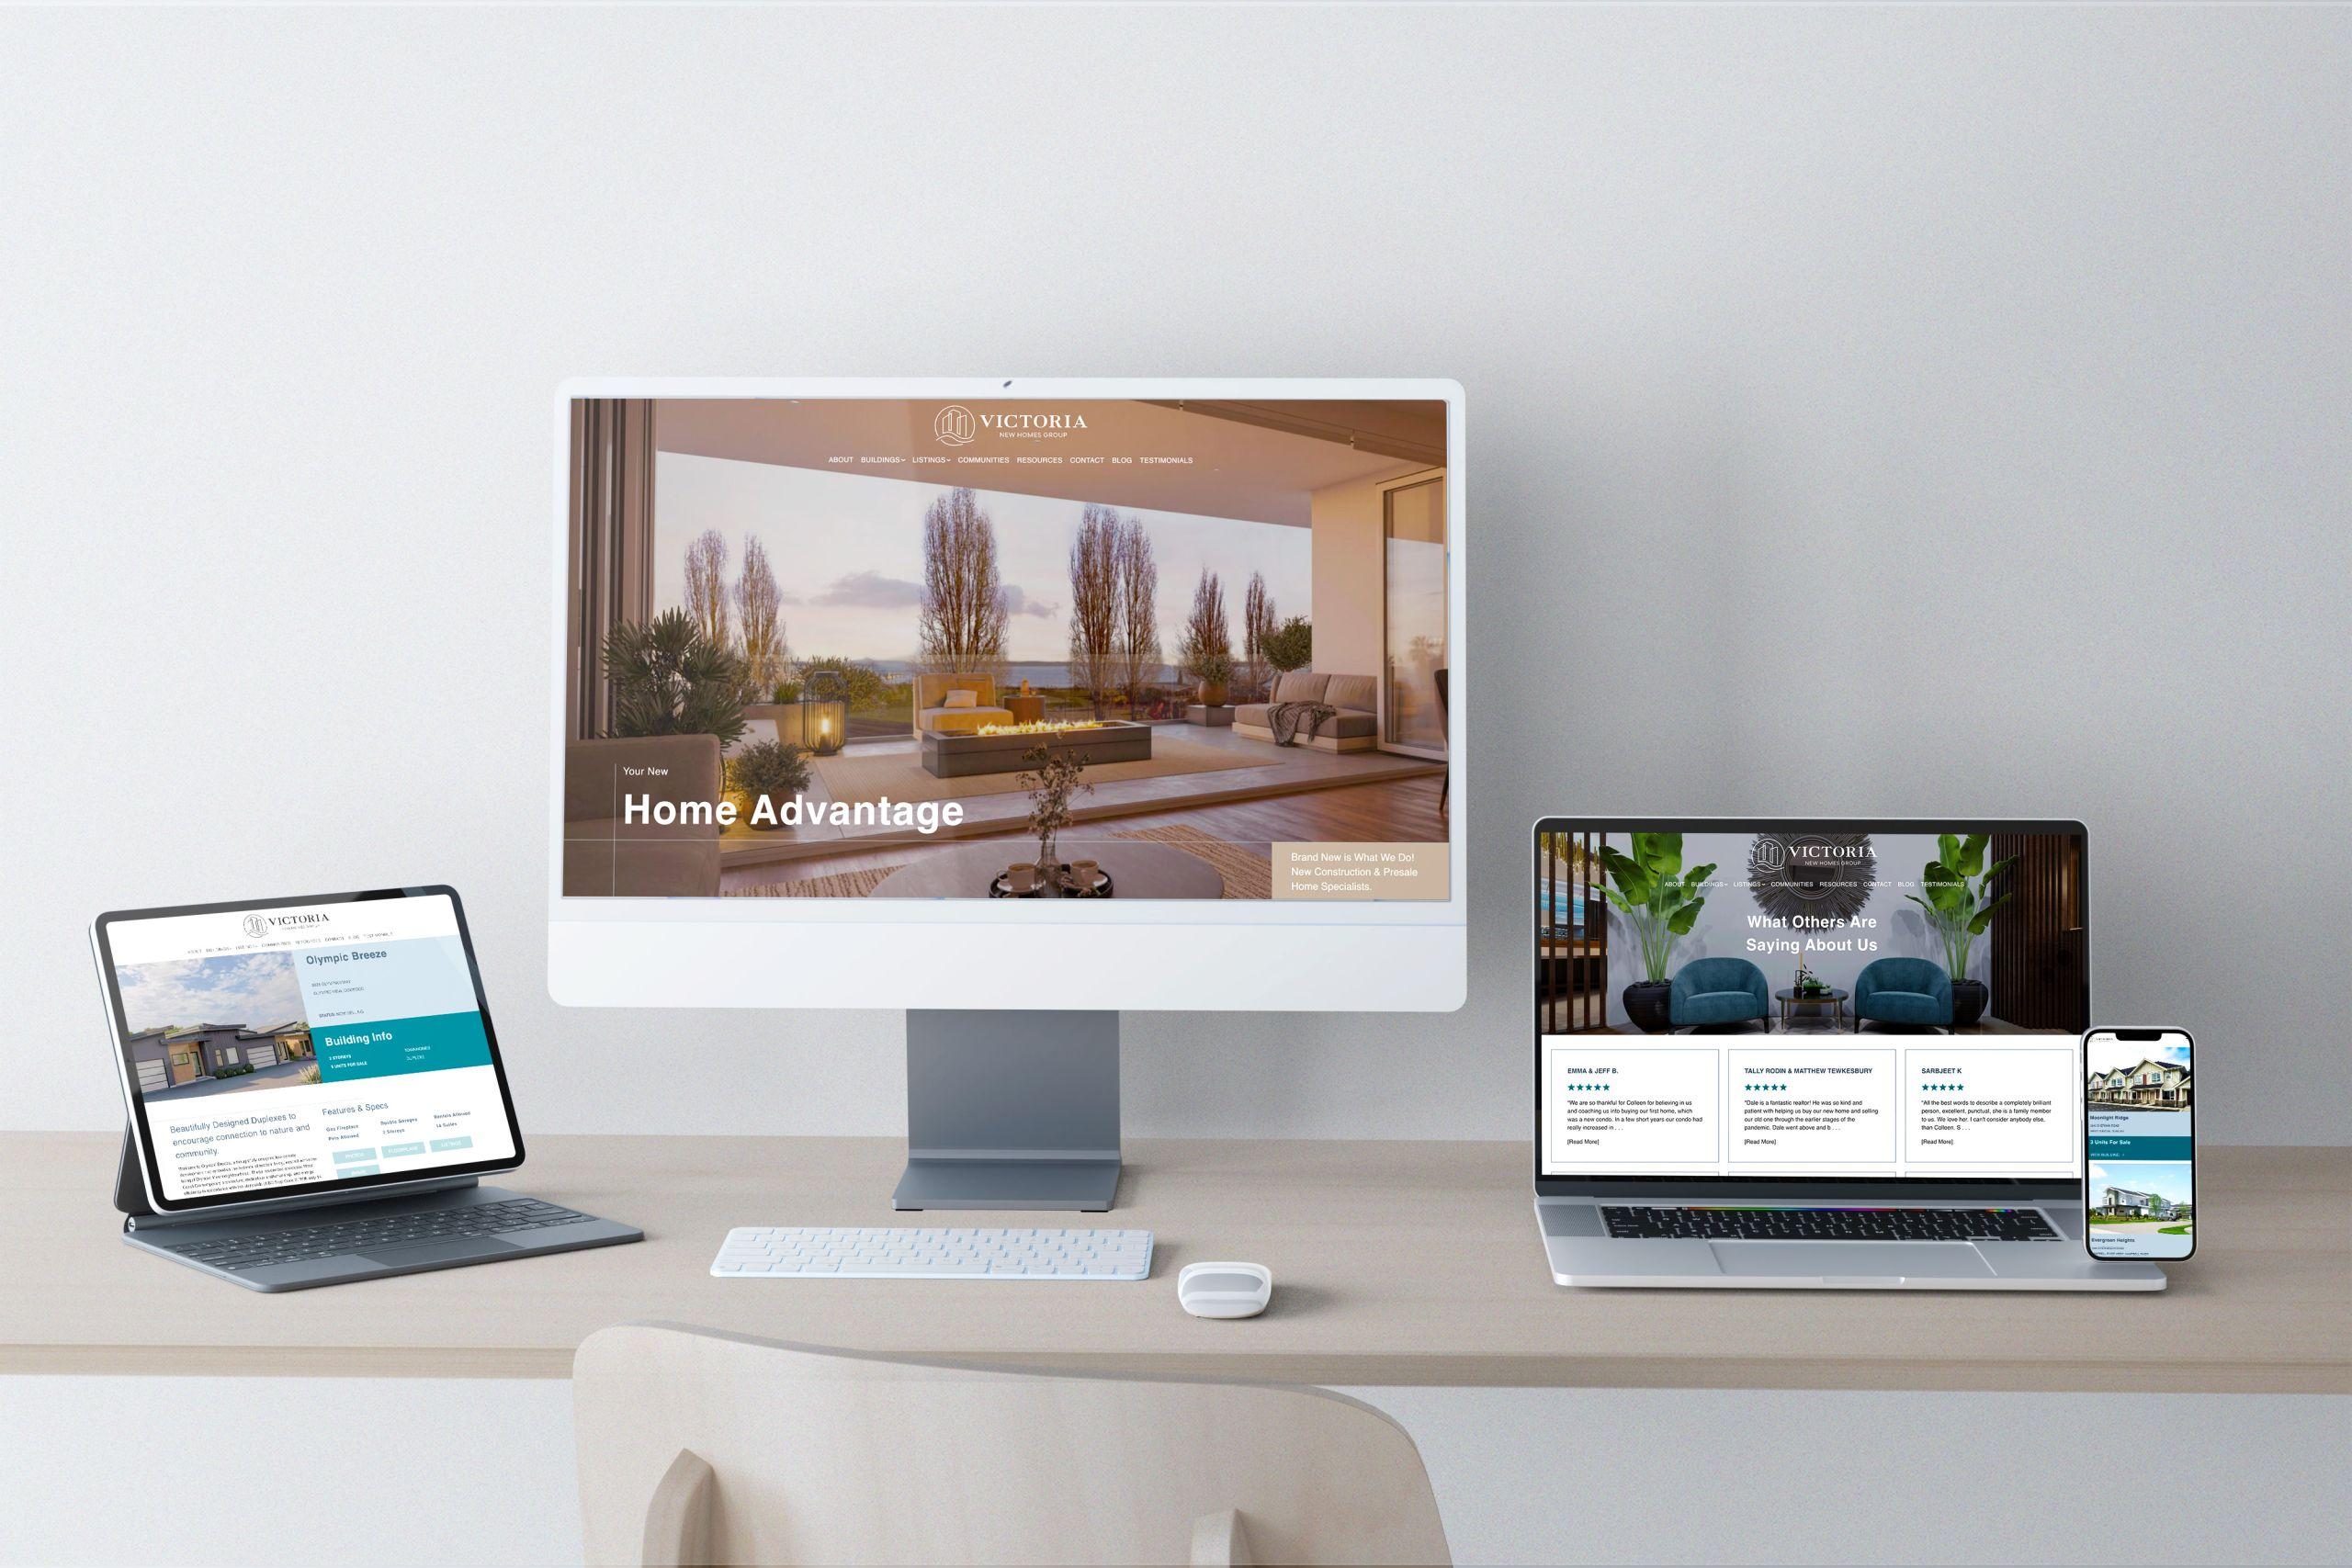 Mockups of Victoria New Homes Group's website and responsive design on multiple device screens.